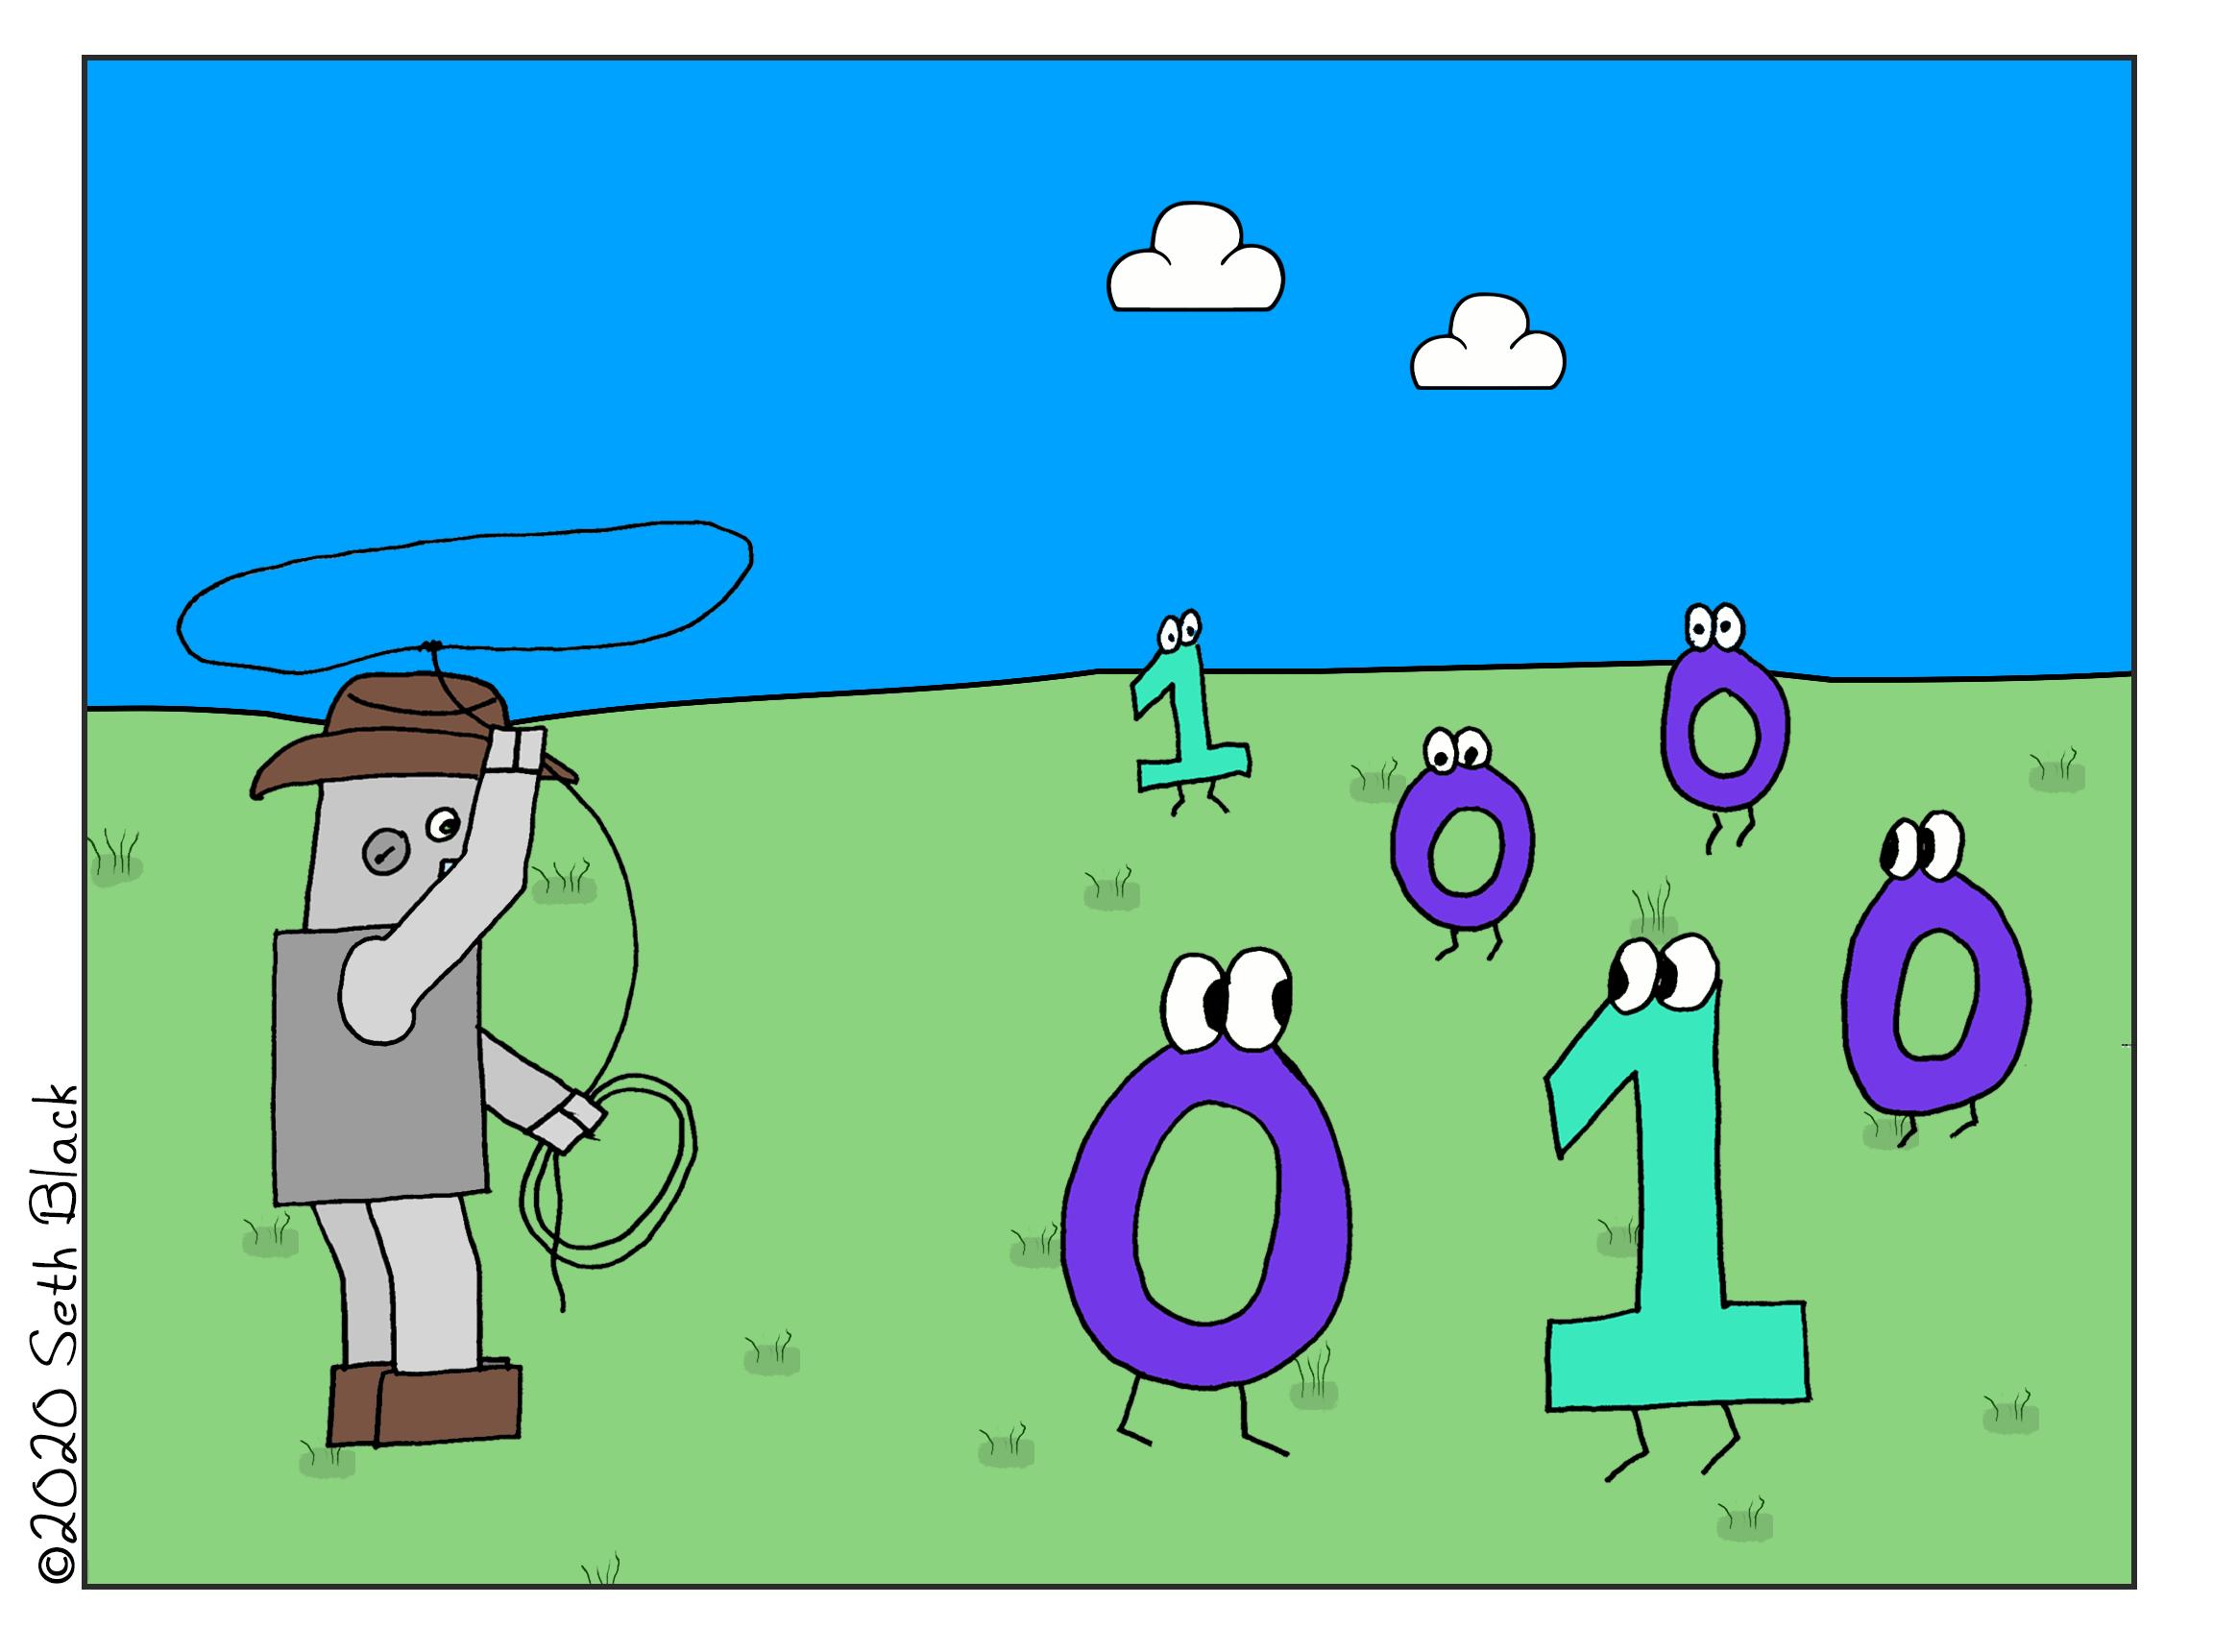 A robot dressed in a cowboy hat is attempting to rope a number from among a herd of 0's and 1's.